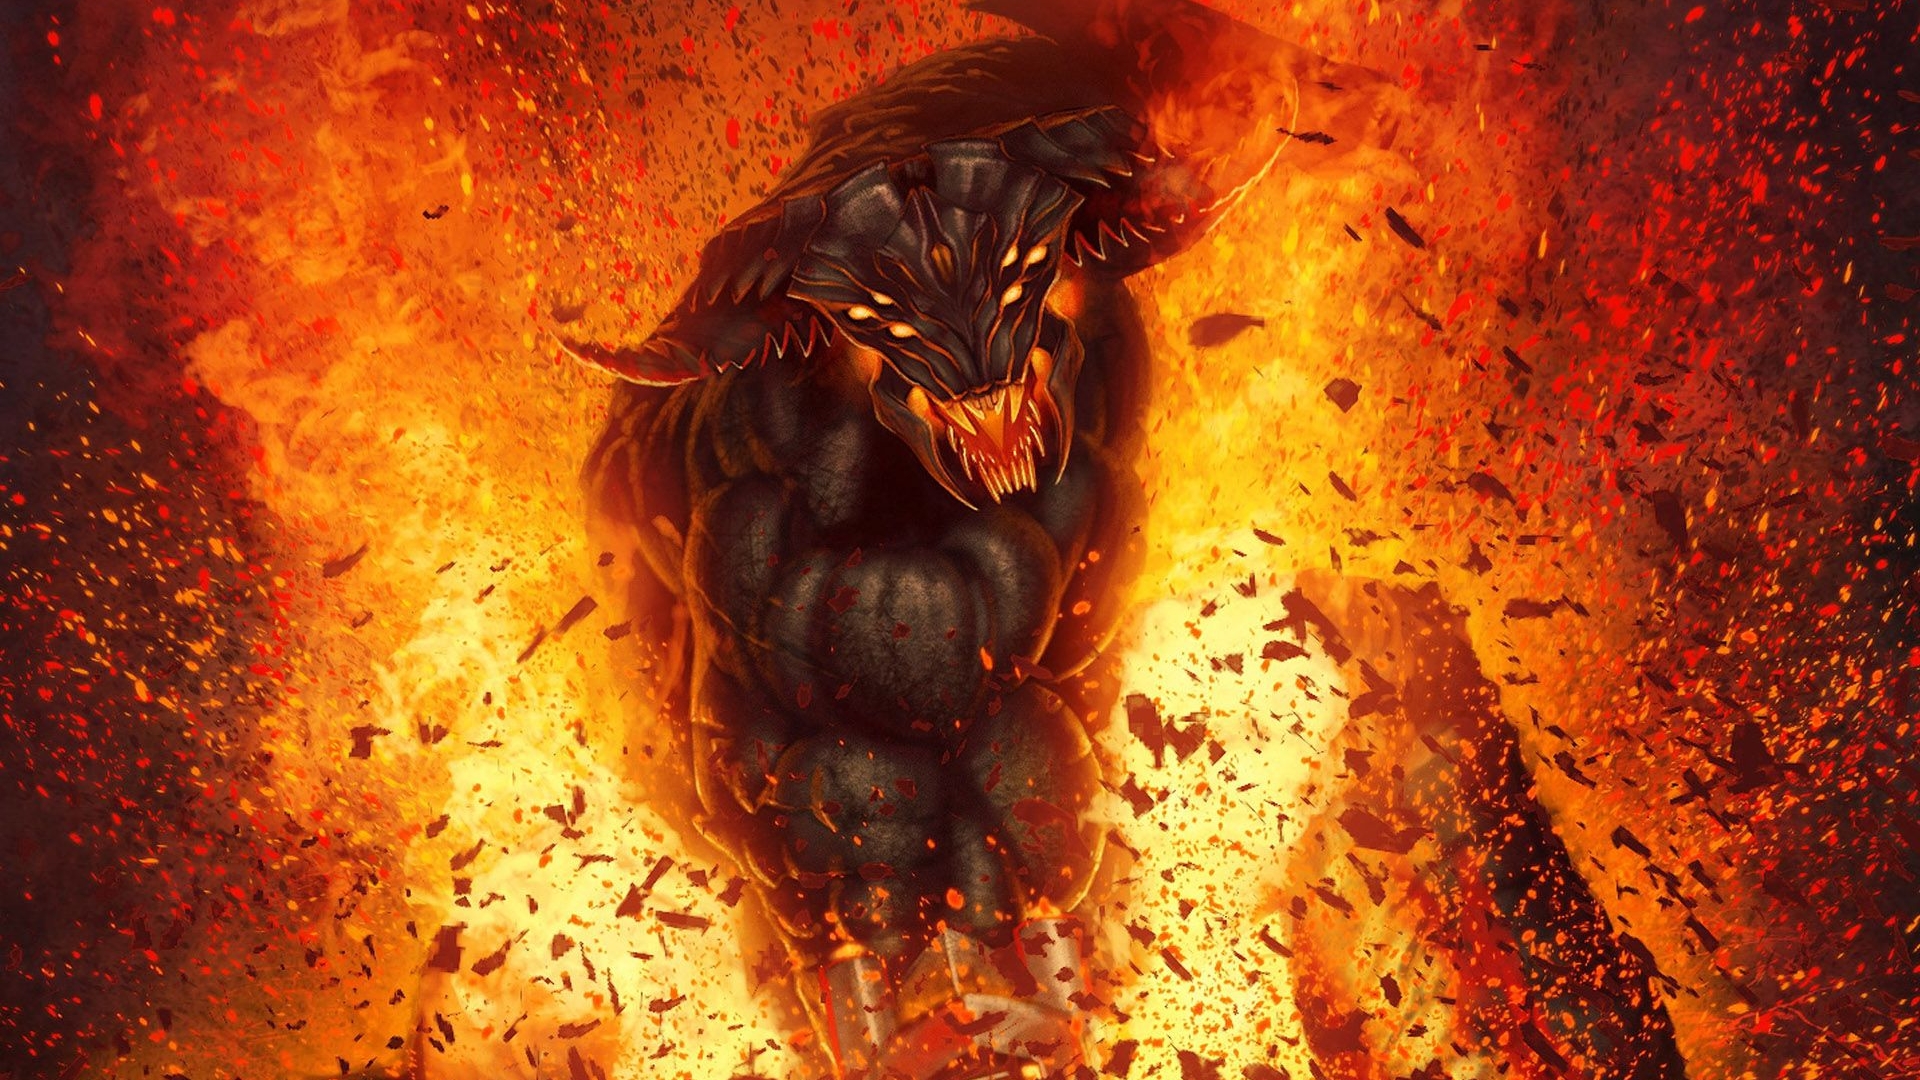 280+ Demon HD Wallpapers and Backgrounds